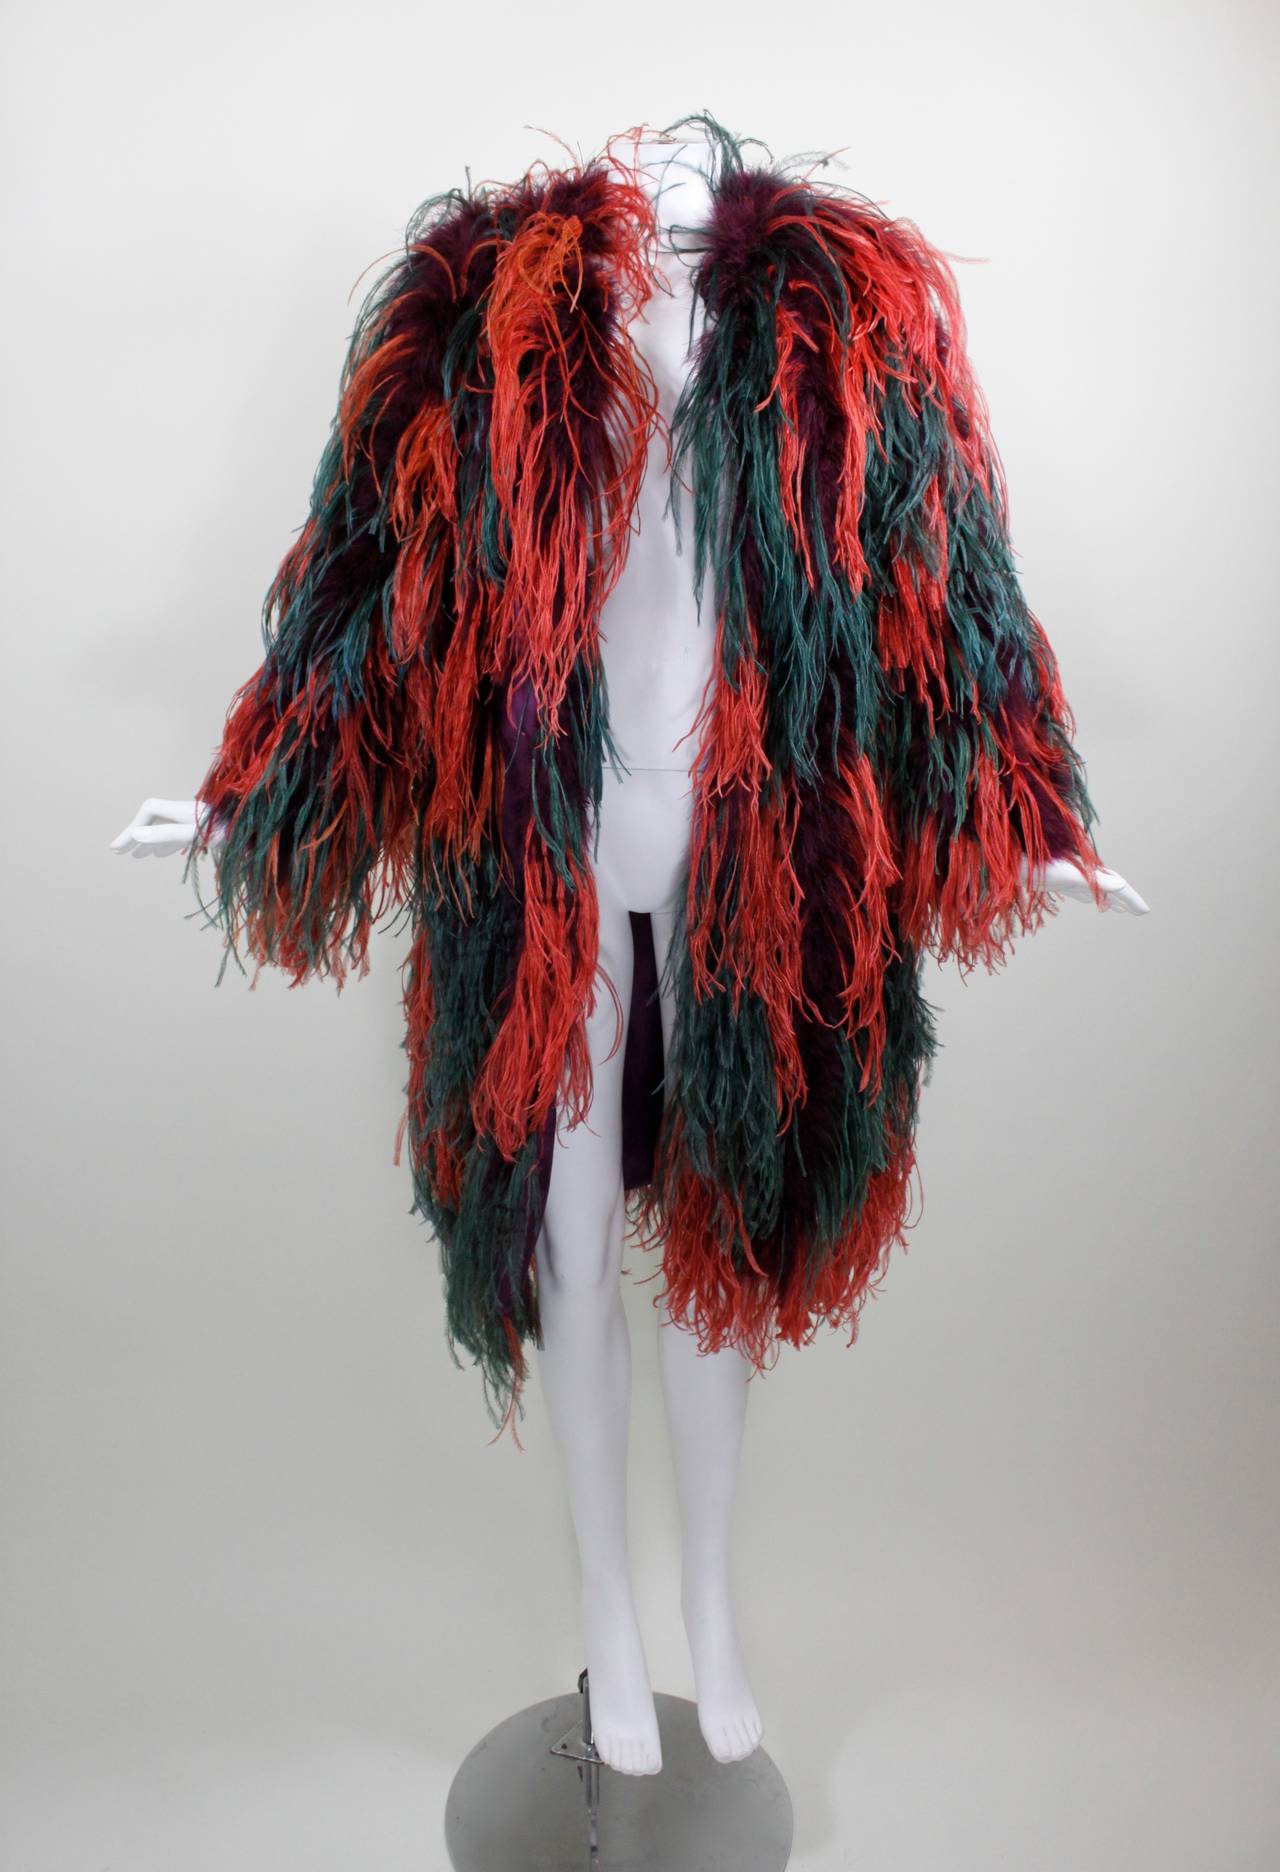 A wonderfully wild coat from Yves Saint Laurent featuring teal and bright brick red ostrich feathers as well as purple marabou throughout. The coat buttons at the neck with a hook and eye, and is fully lined.

Measurements--
44 inches across